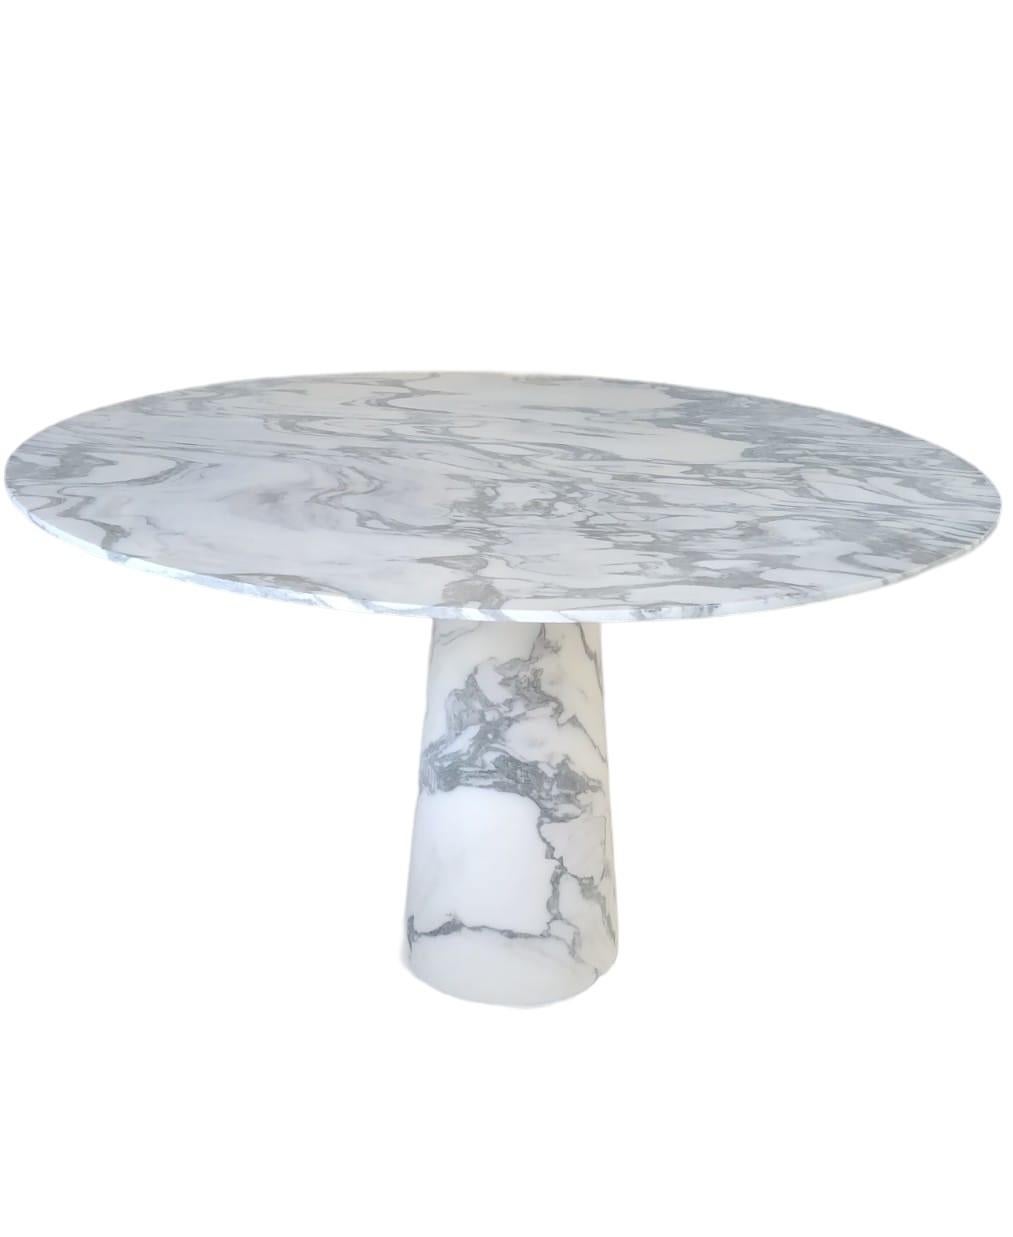 Italian Art Deco Style Marble Travertine Tables For Sale